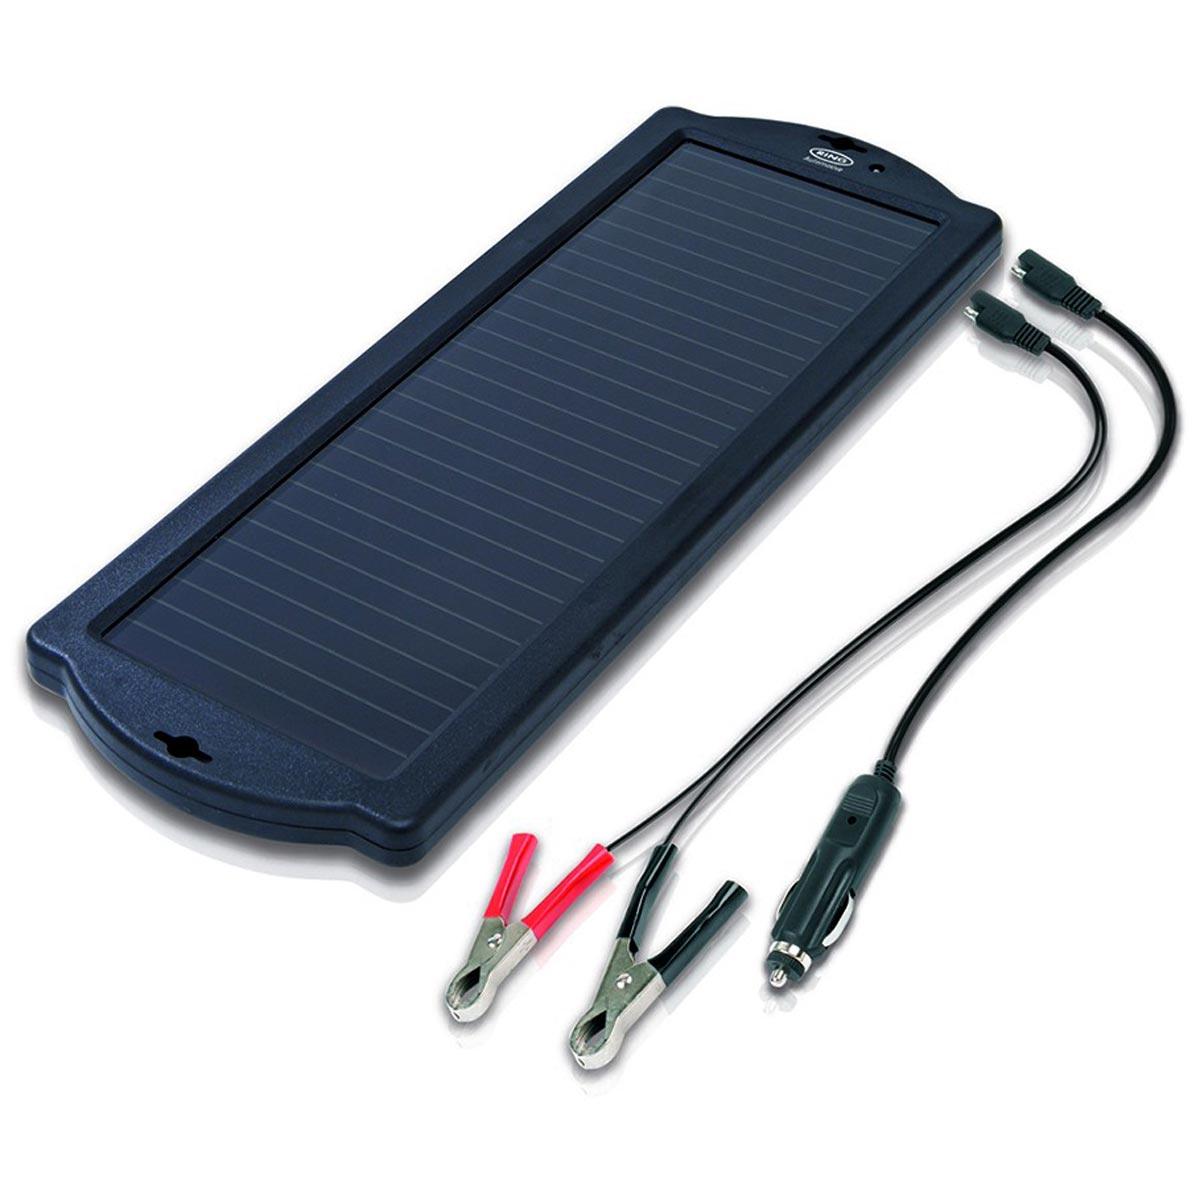 Ring 12v 1.5w Solar Trickle Charger - Black - Browse our range of Care: Chargers - getgearedshop 